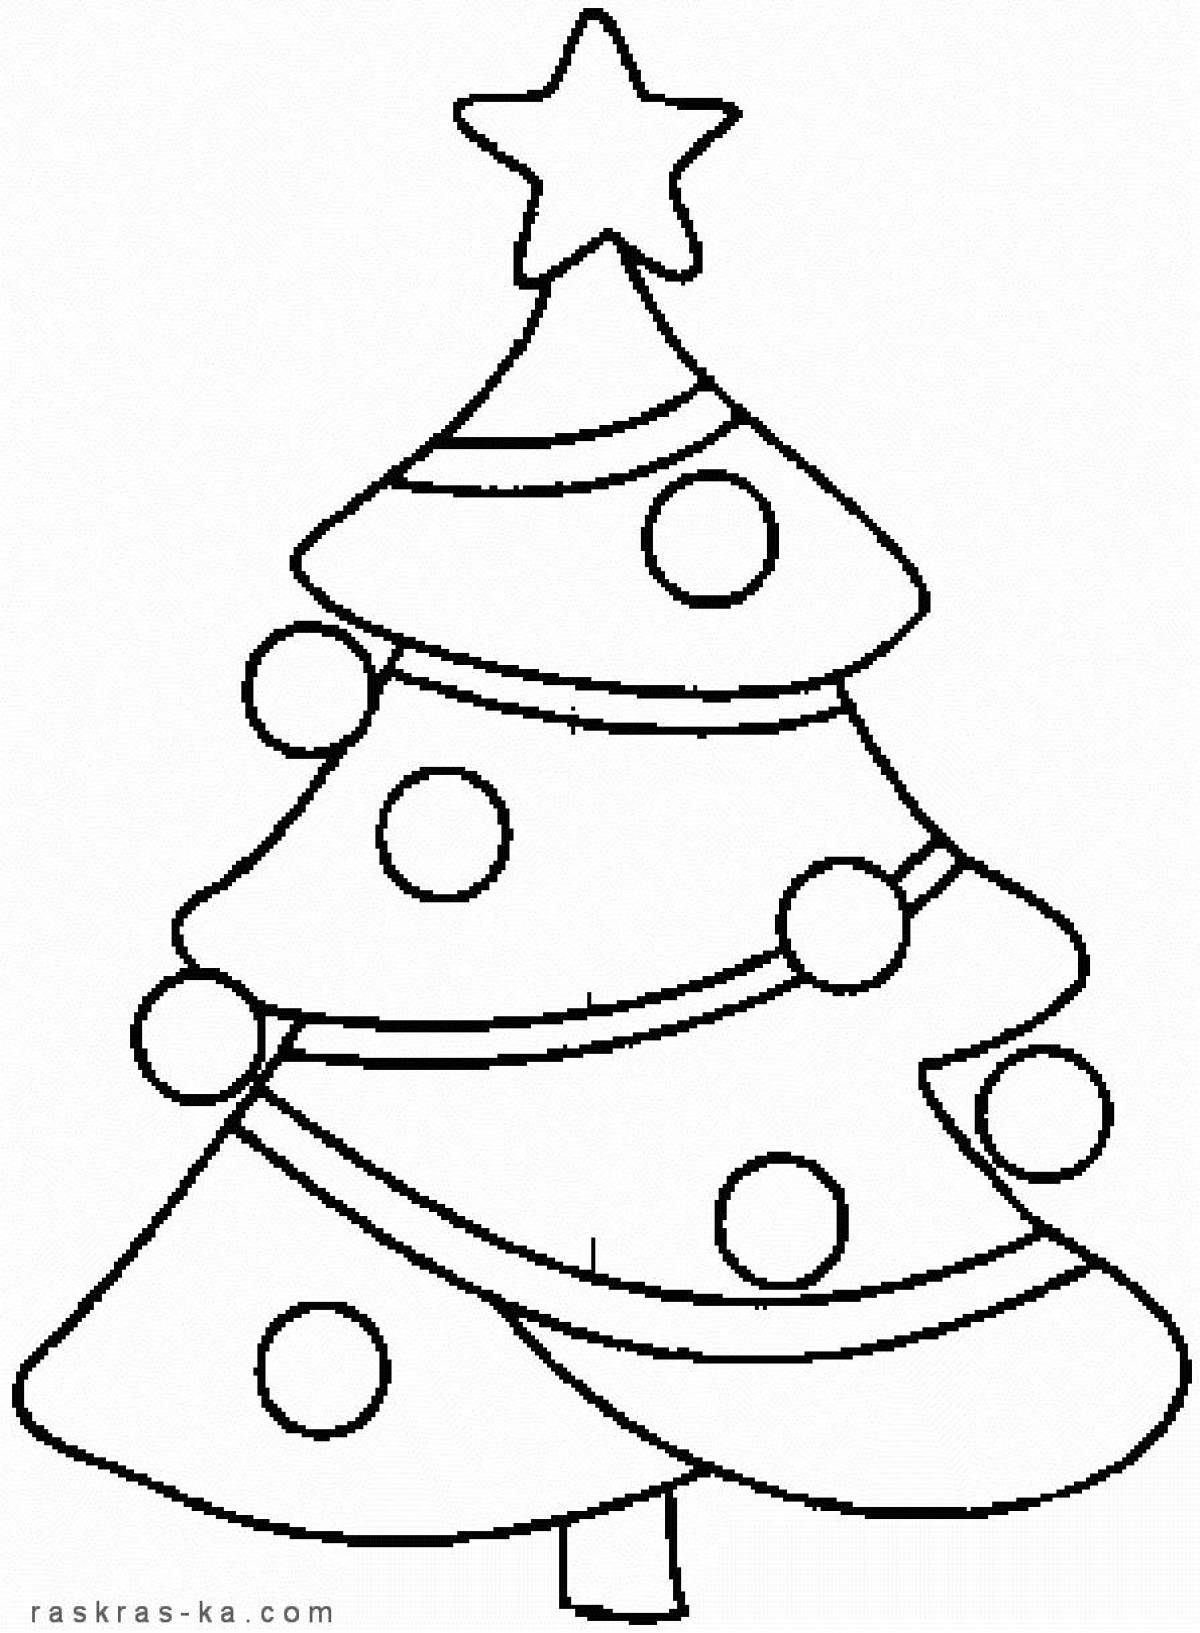 Great Christmas tree coloring book for kids 3-4 years old